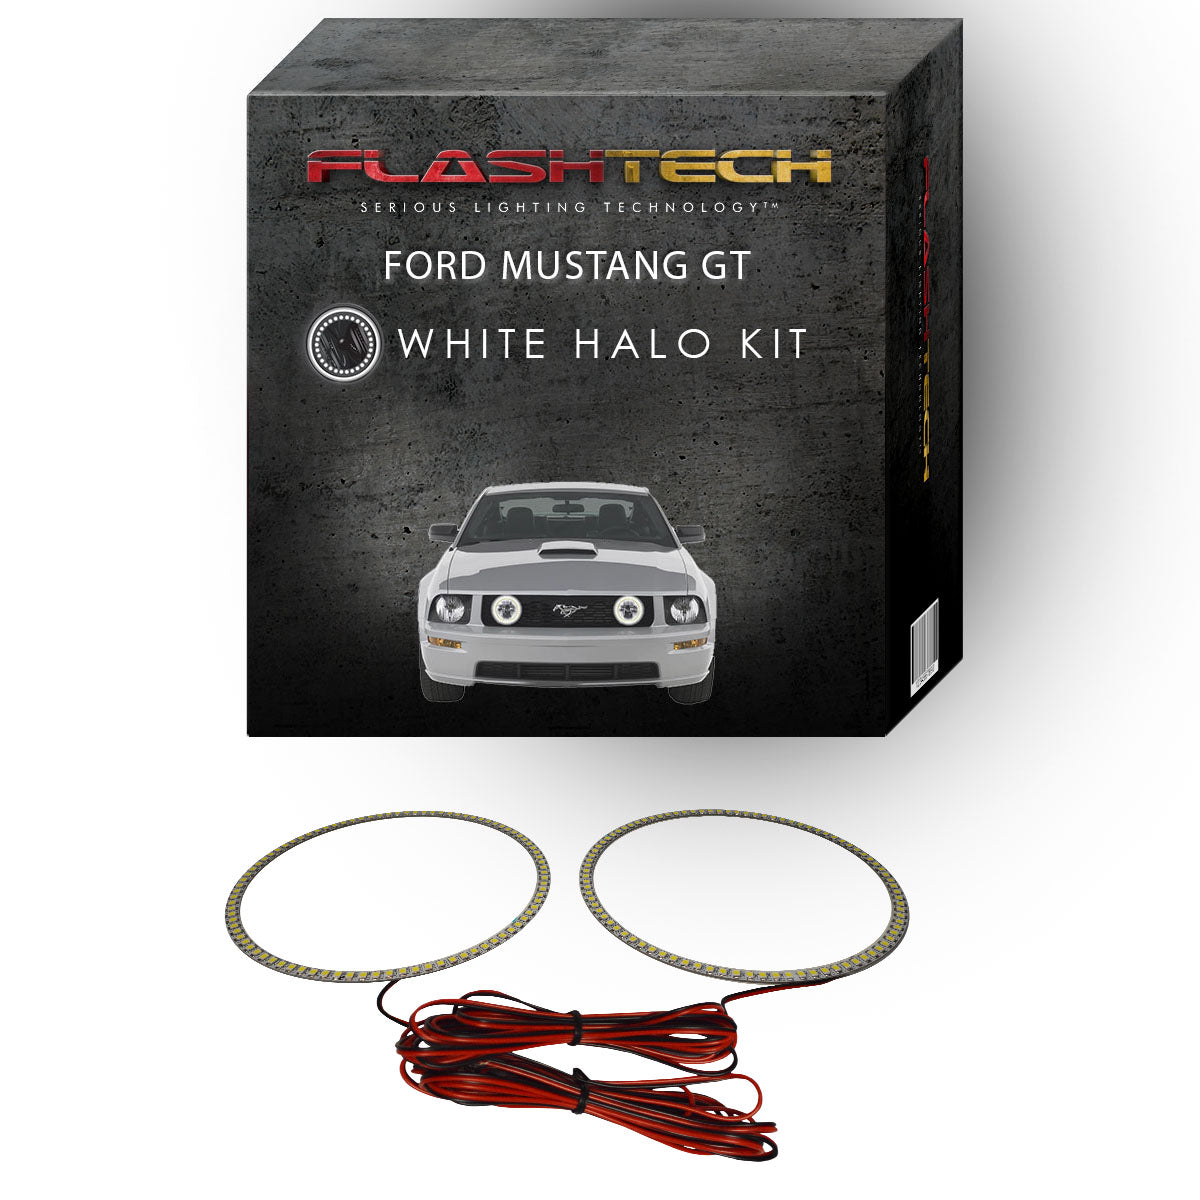 Ford-Mustang-2005, 2006, 2007, 2008, 2009-LED-Halo-Fog Lights-White-RF Remote White-FO-MUGT0509-WFRF